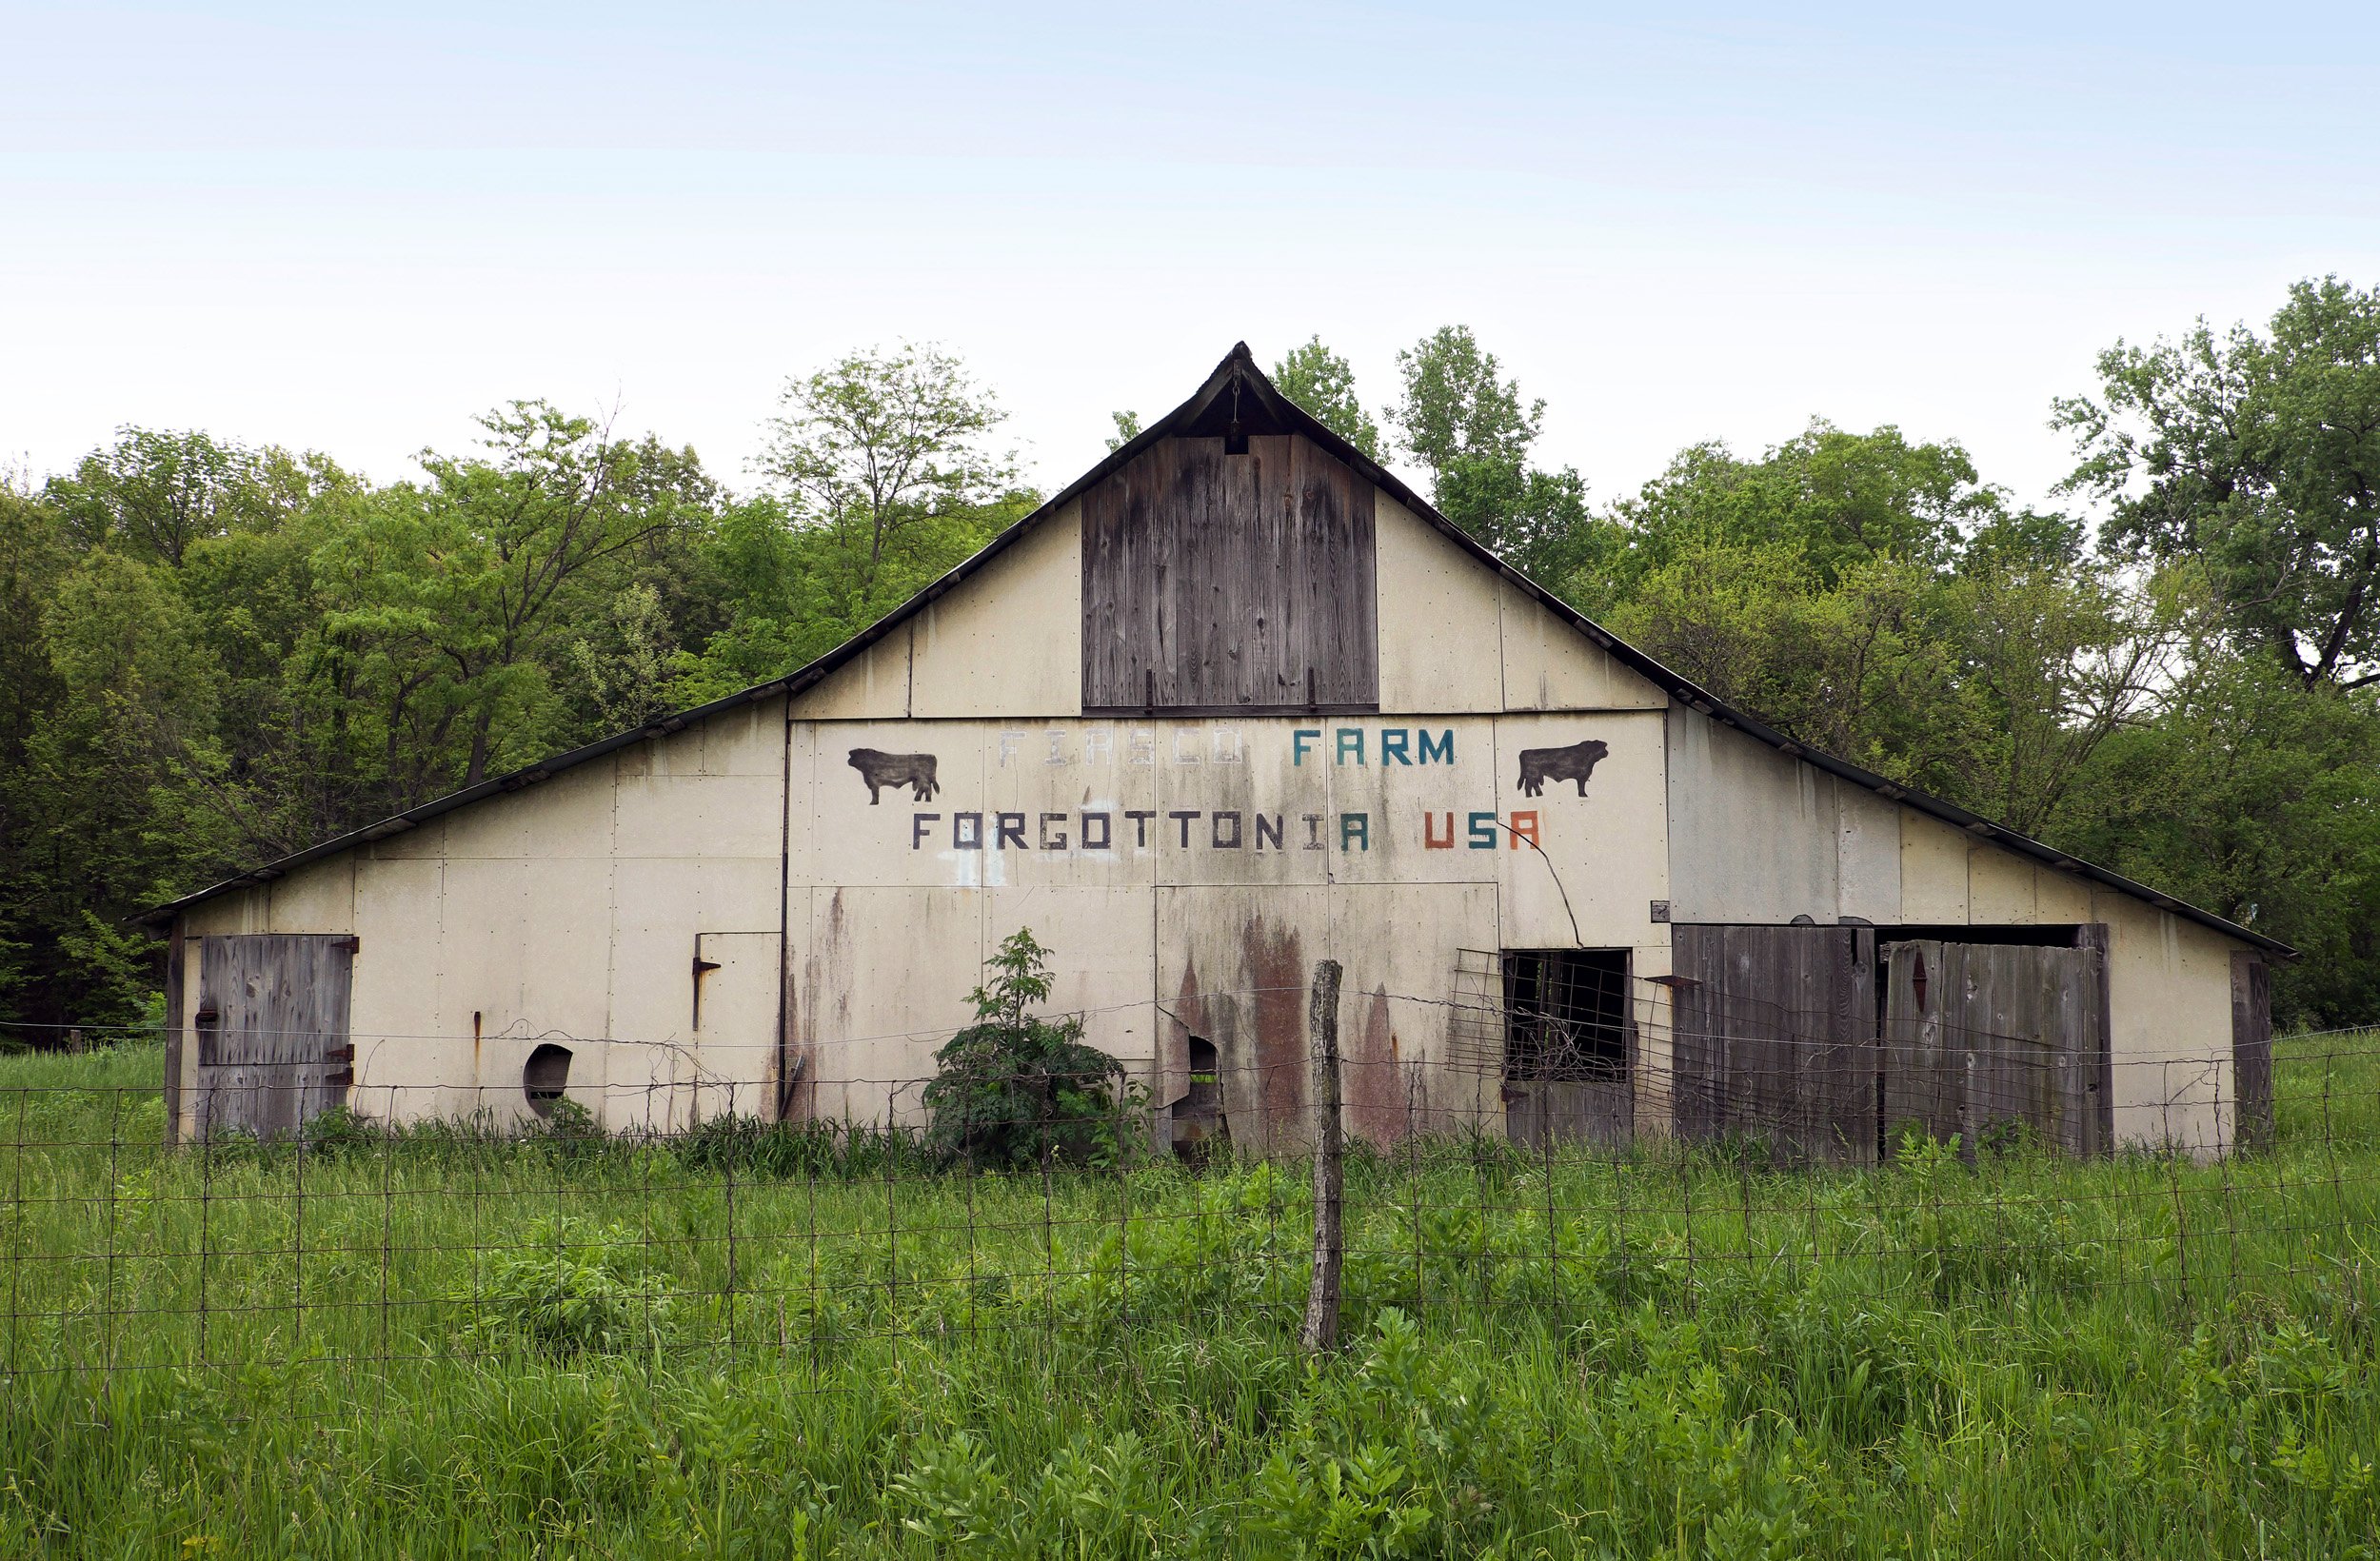  Barn with painted Forgottonia sign. Ellisville, IL. May, 2016 